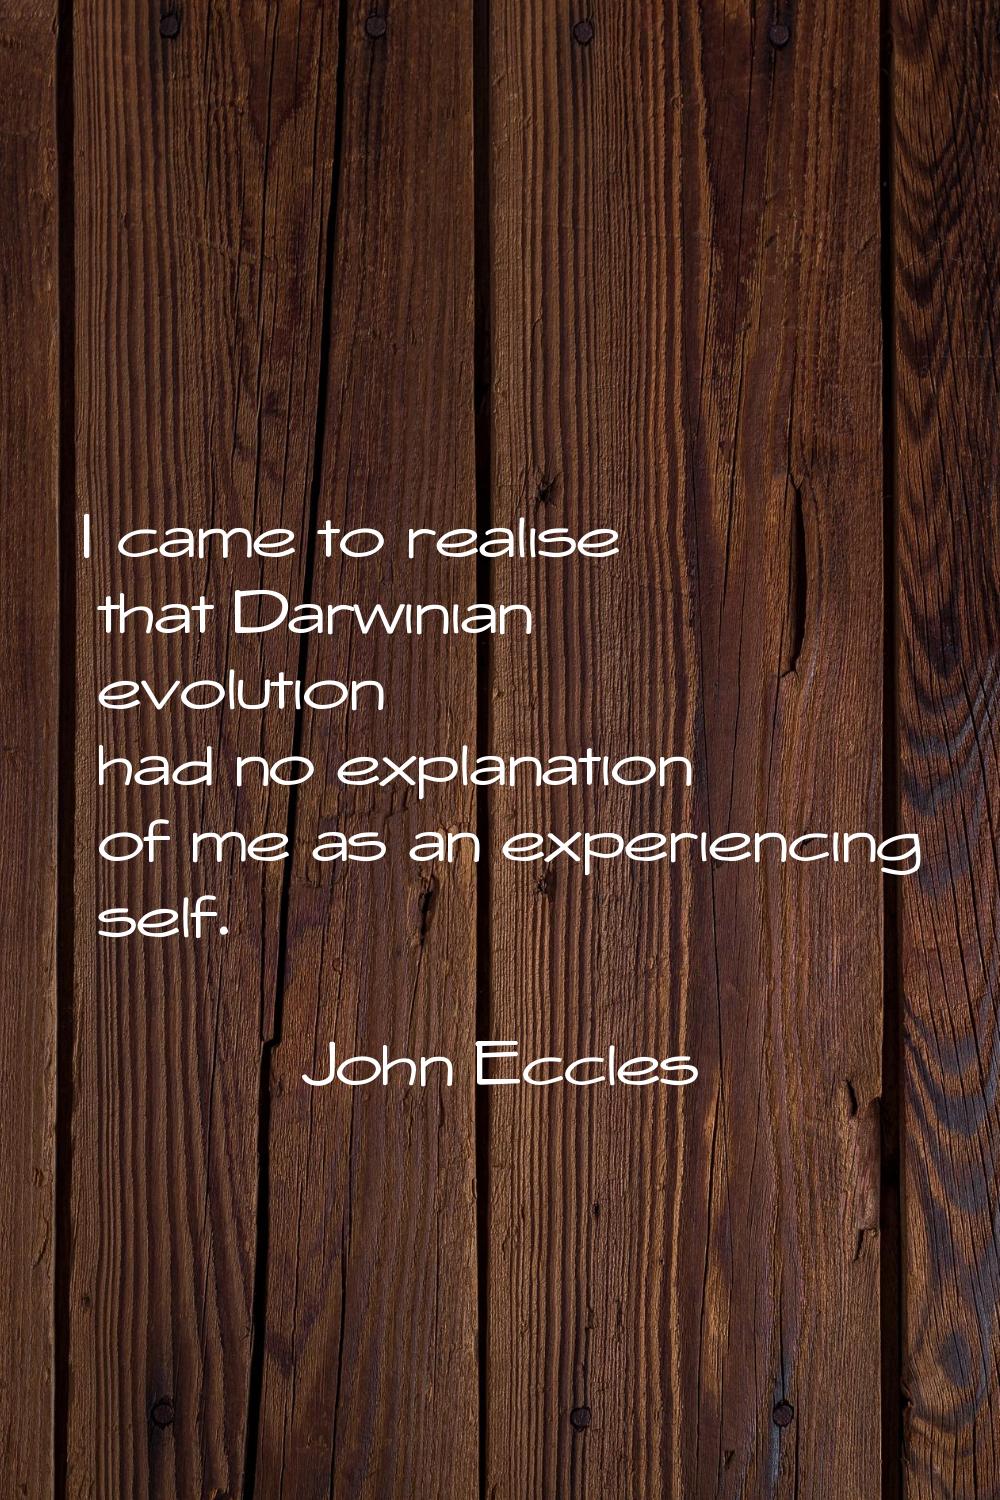 I came to realise that Darwinian evolution had no explanation of me as an experiencing self.